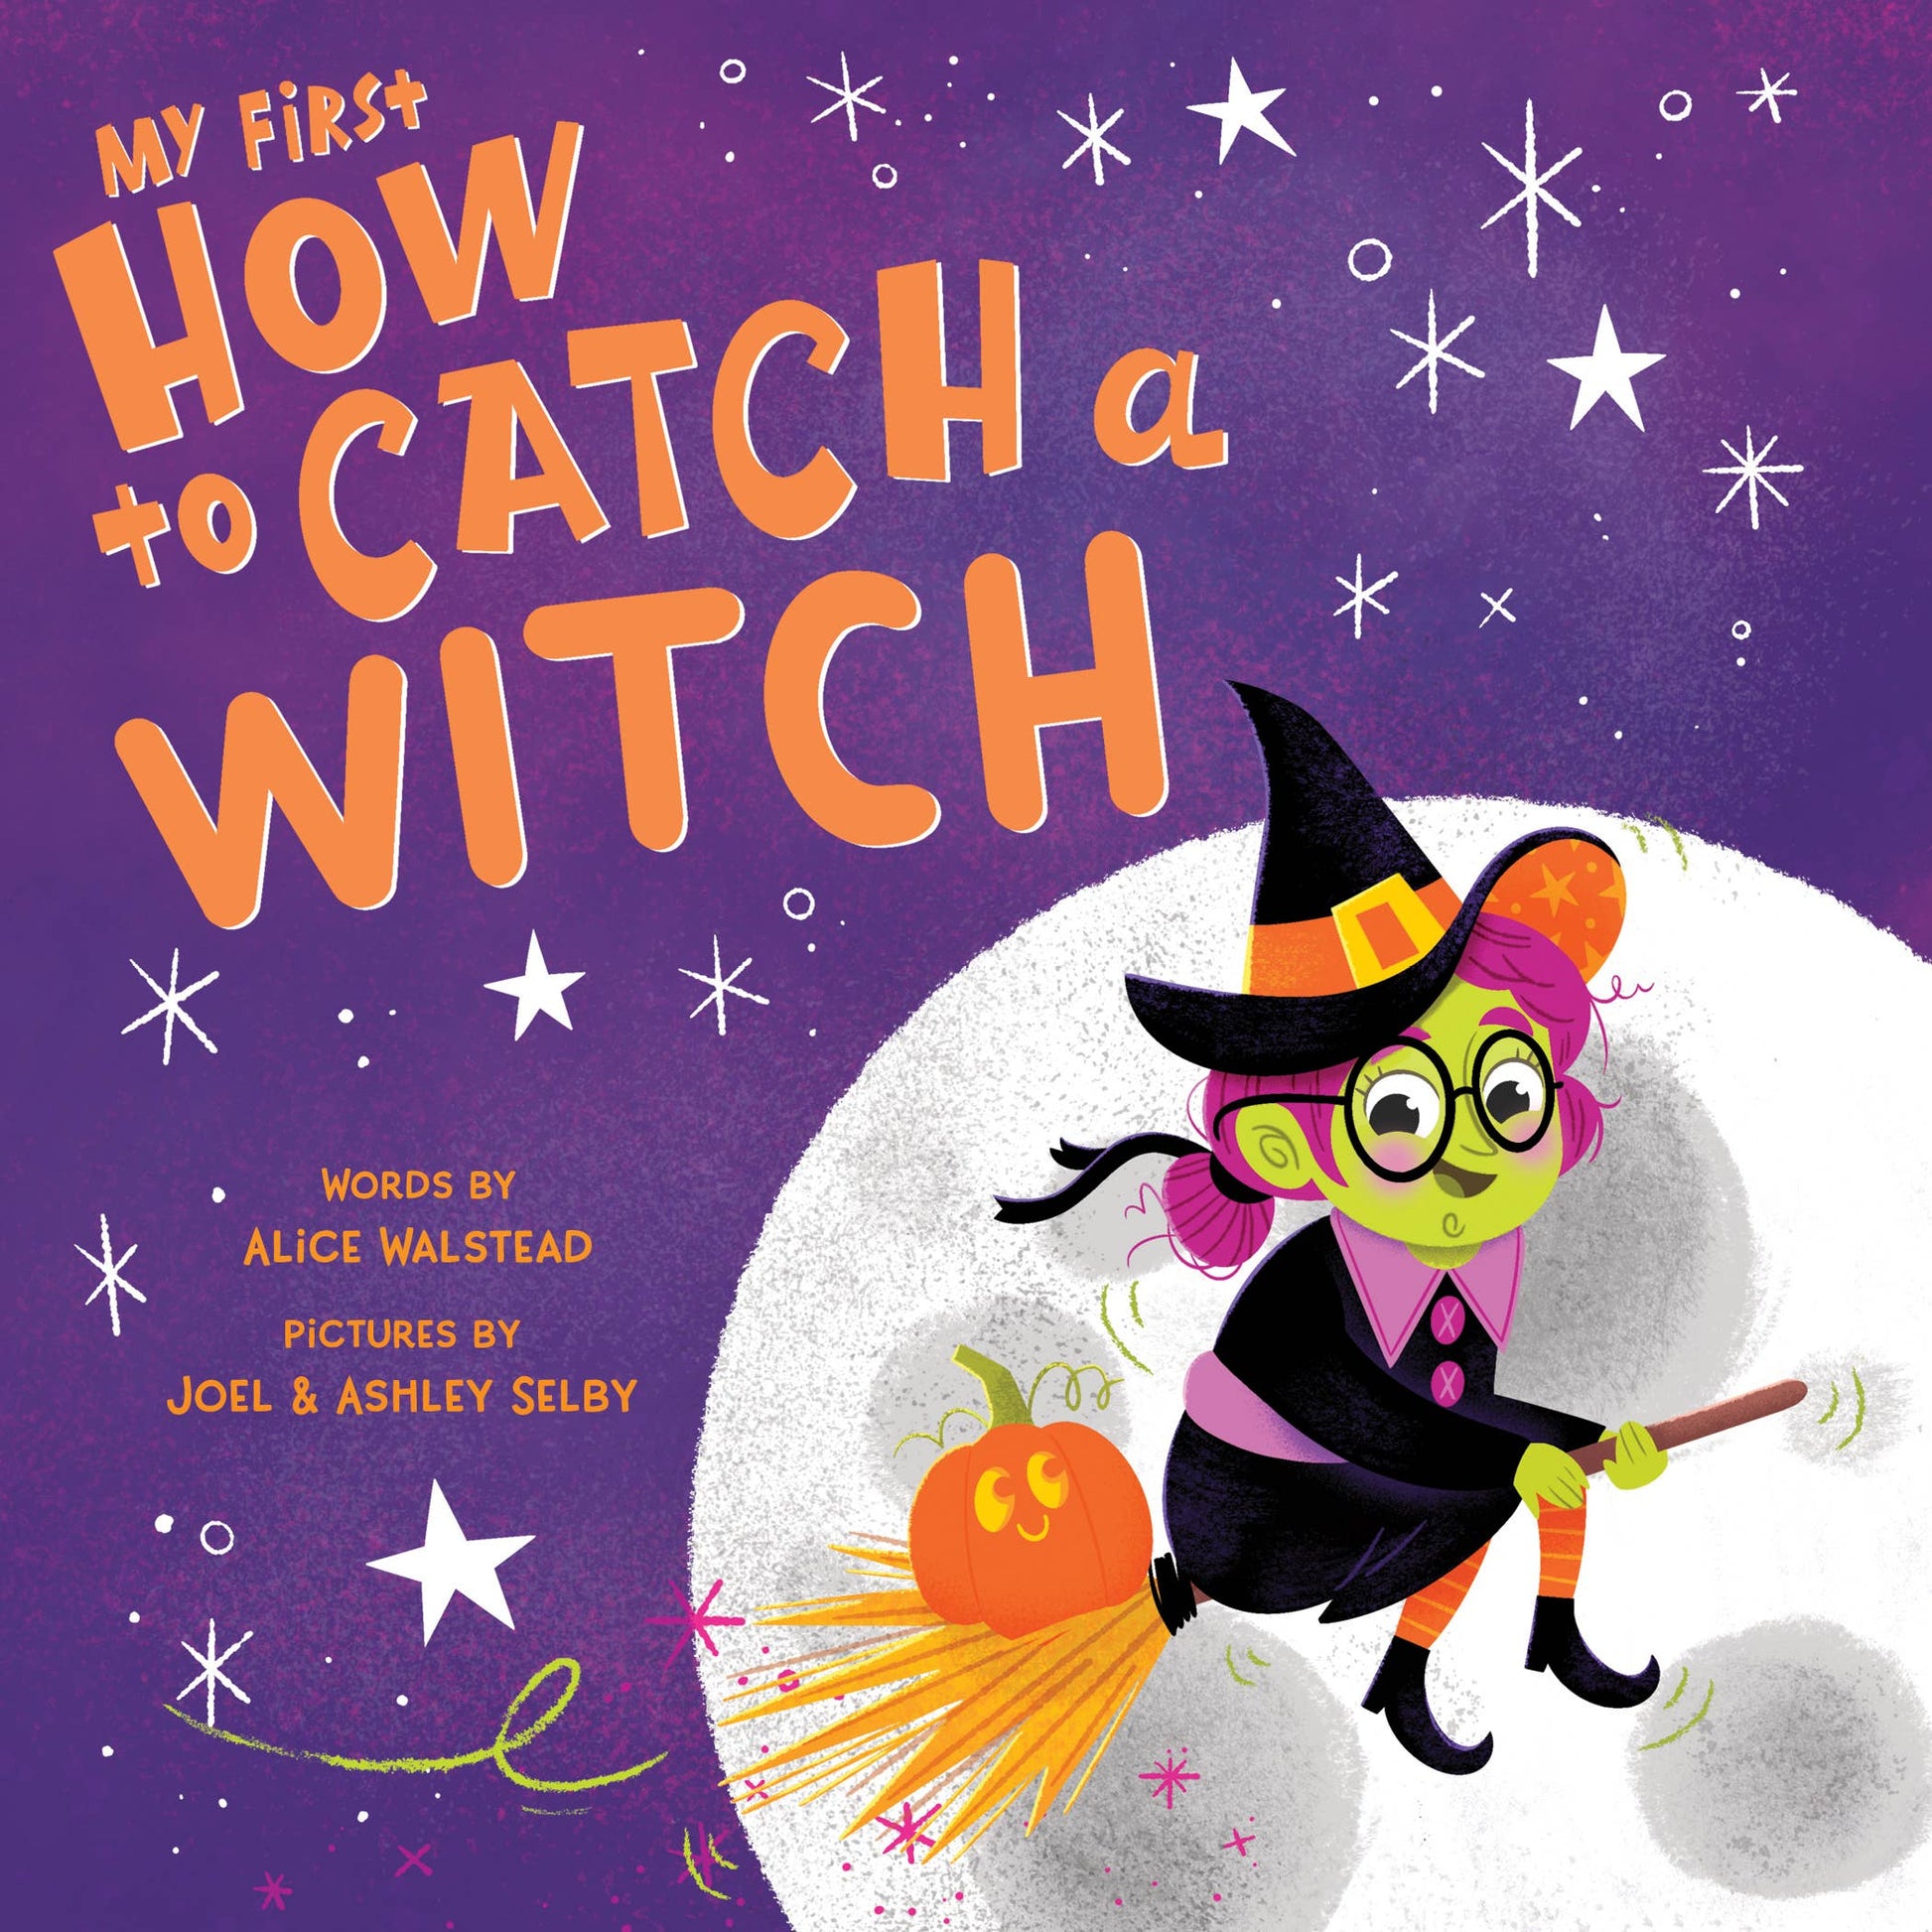 My First How to Catch a Witch (board book) - Einstein's Attic